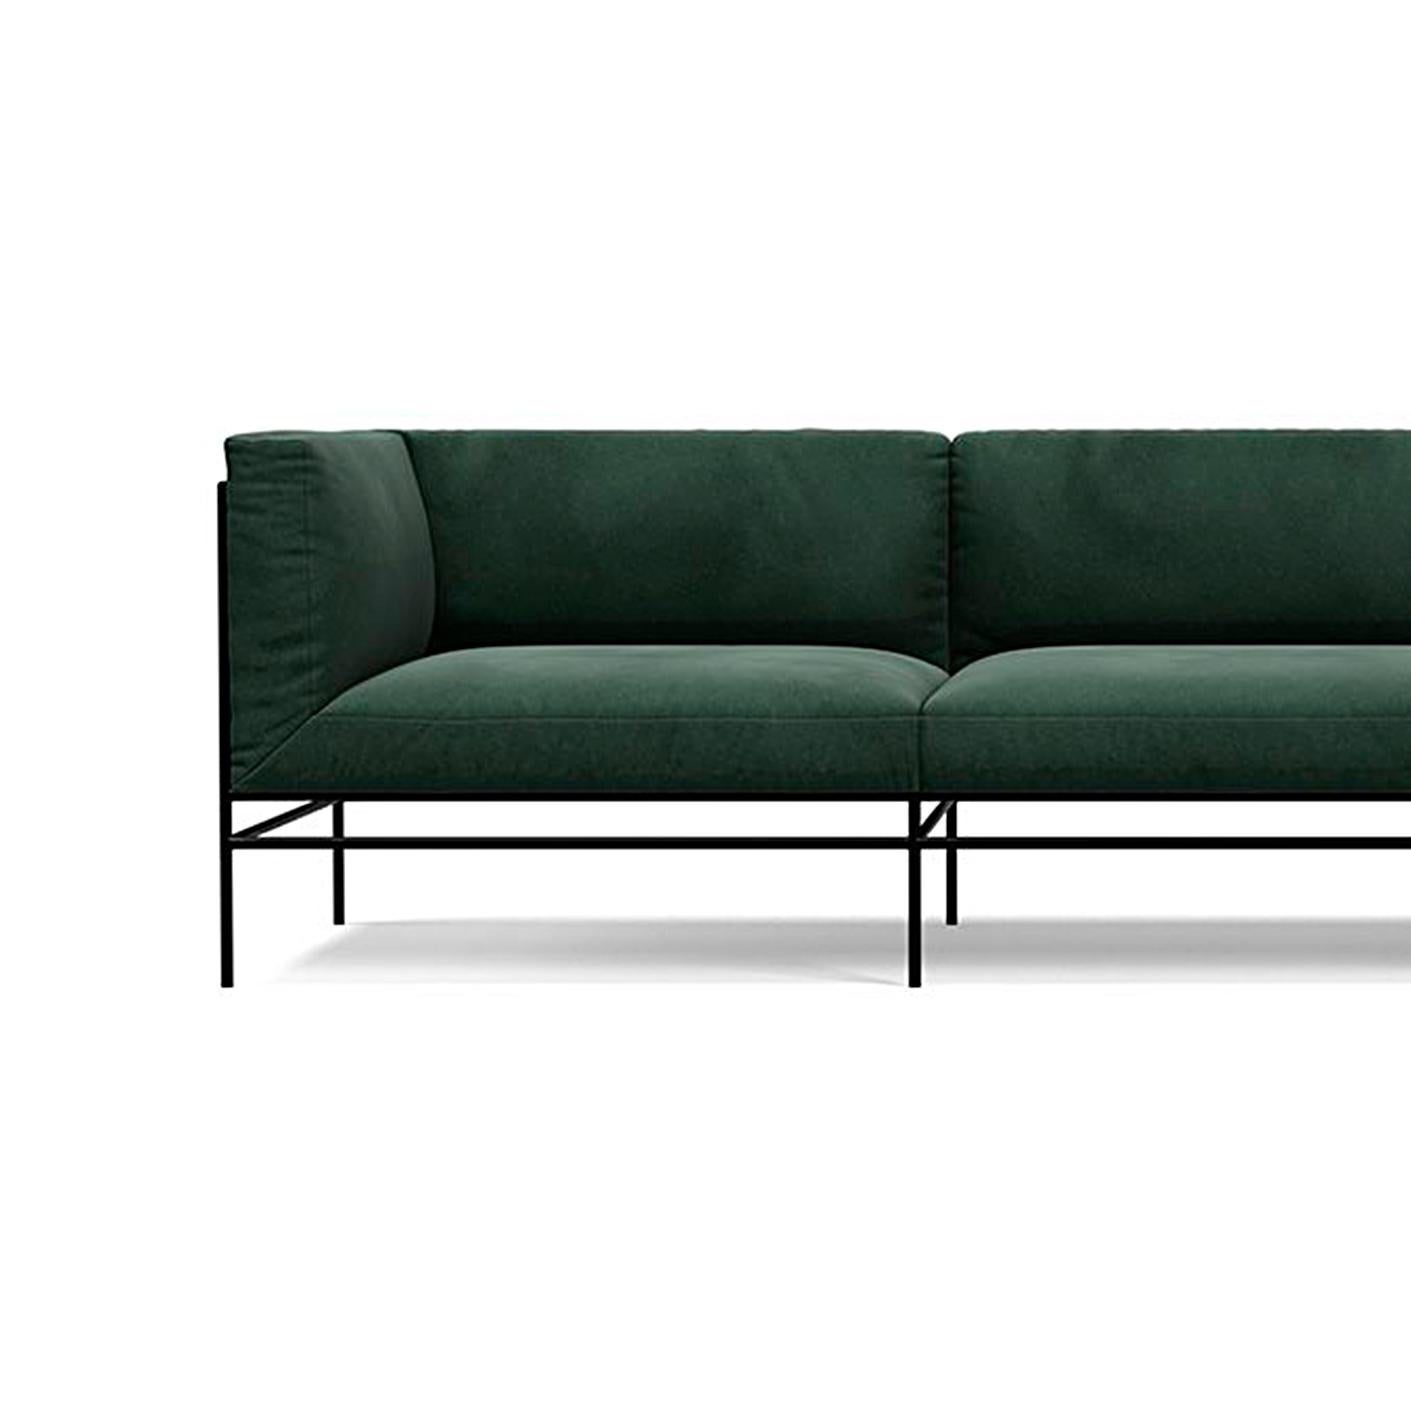 'Middleweight' three seater by Michael Anastassiades for Karakter

Middleweight is Michael Anastassiades’ very first upholstered piece of furniture. The piece captures the best of two worlds, the Italian super lounge sofa on one side and the